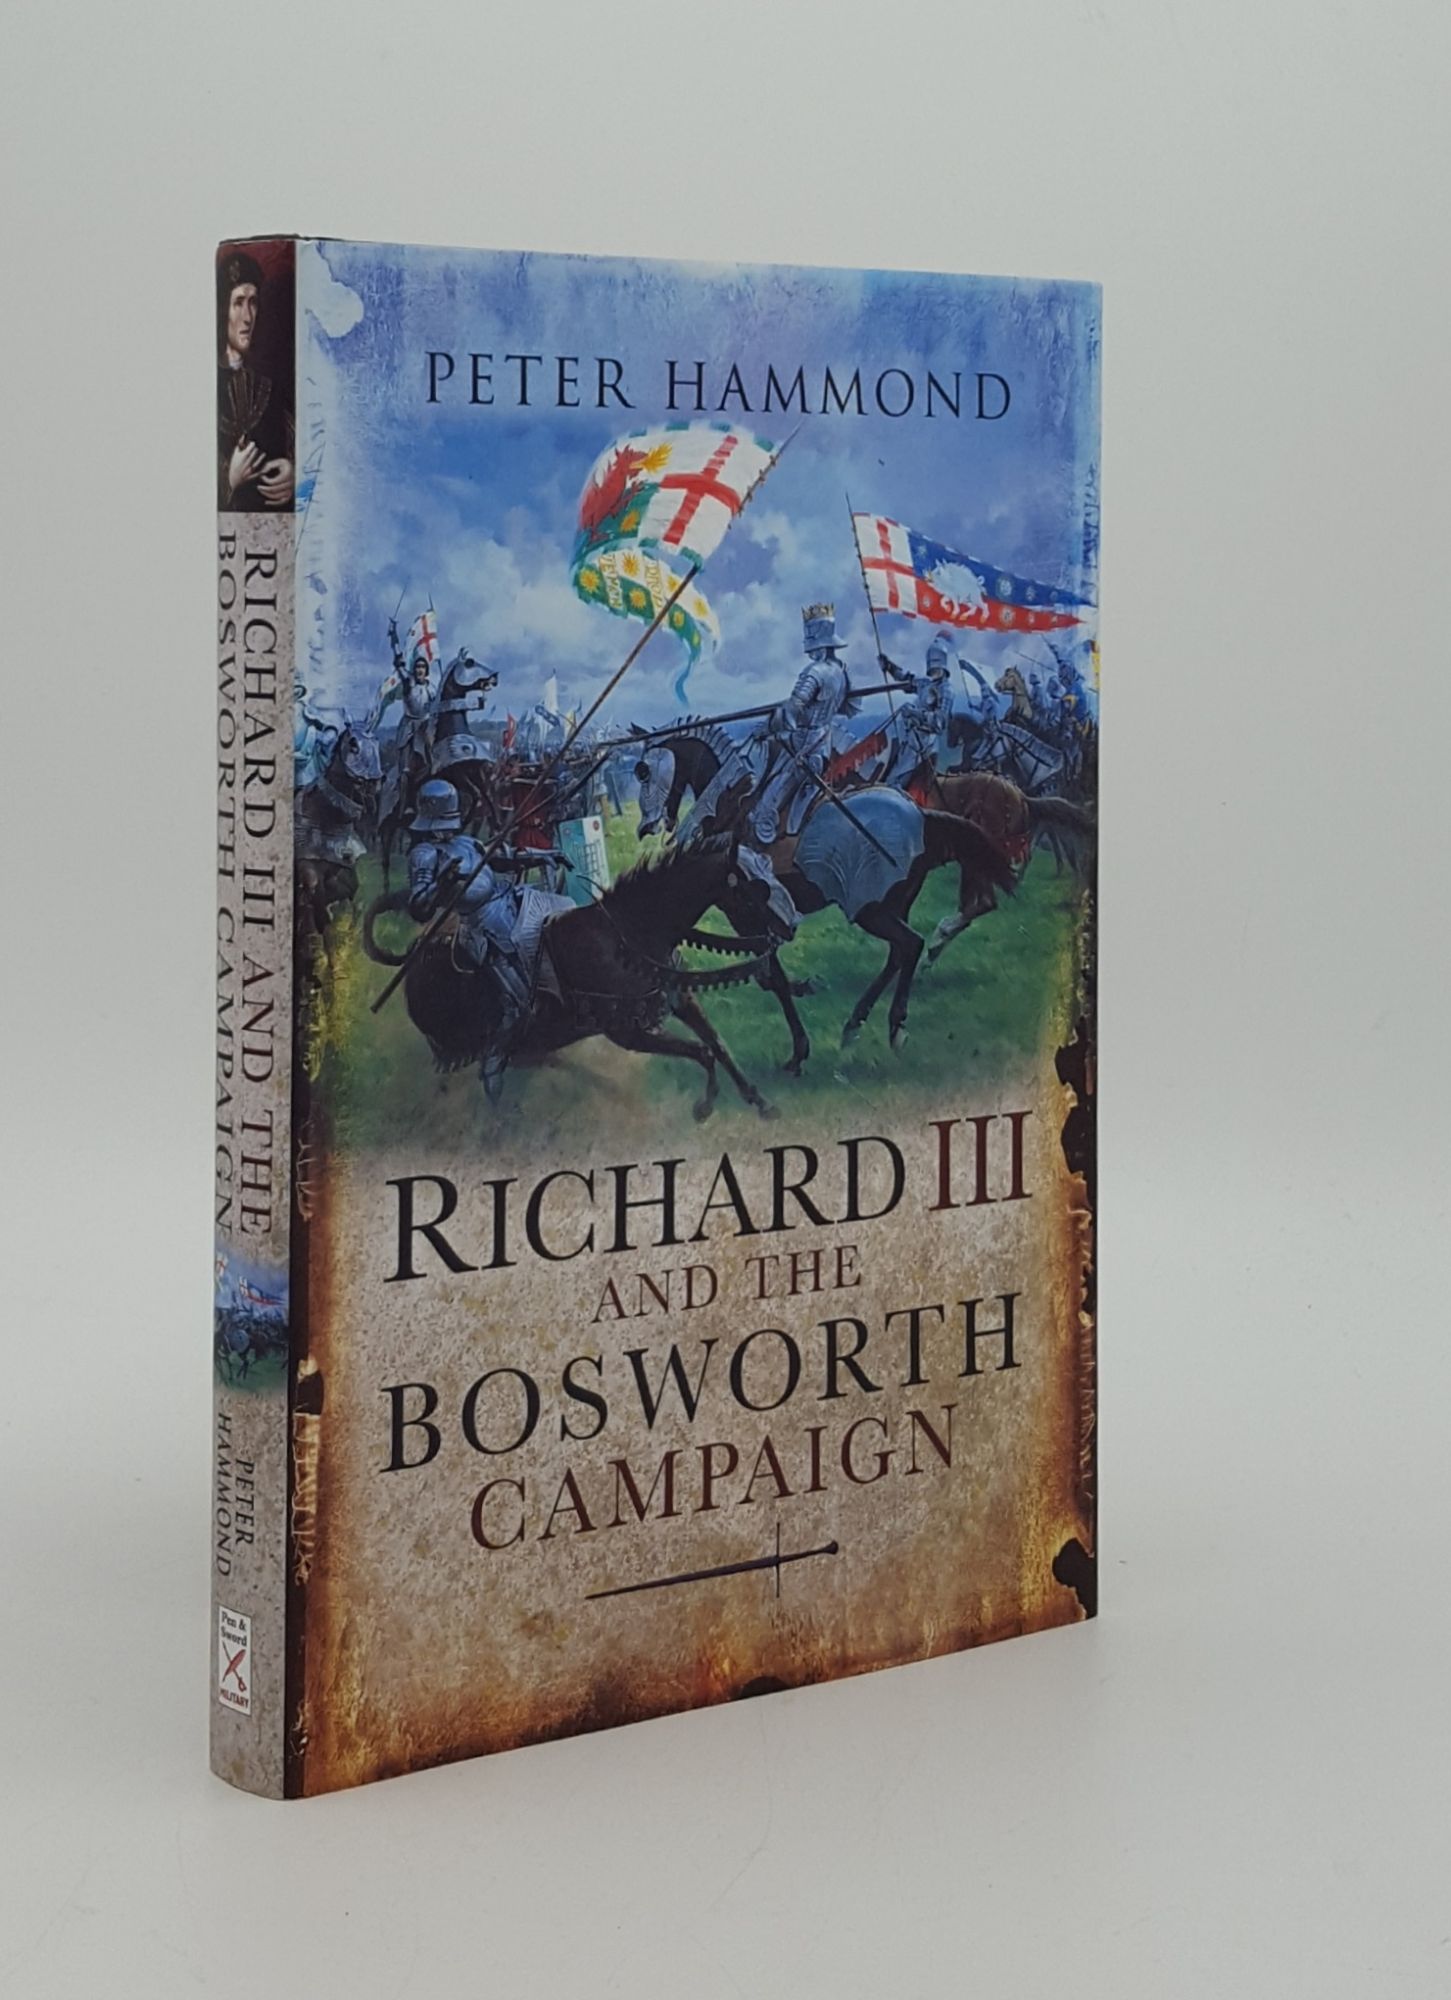 RICHARD III AND THE BOSWORTH CAMPAIGN - HAMMOND Peter